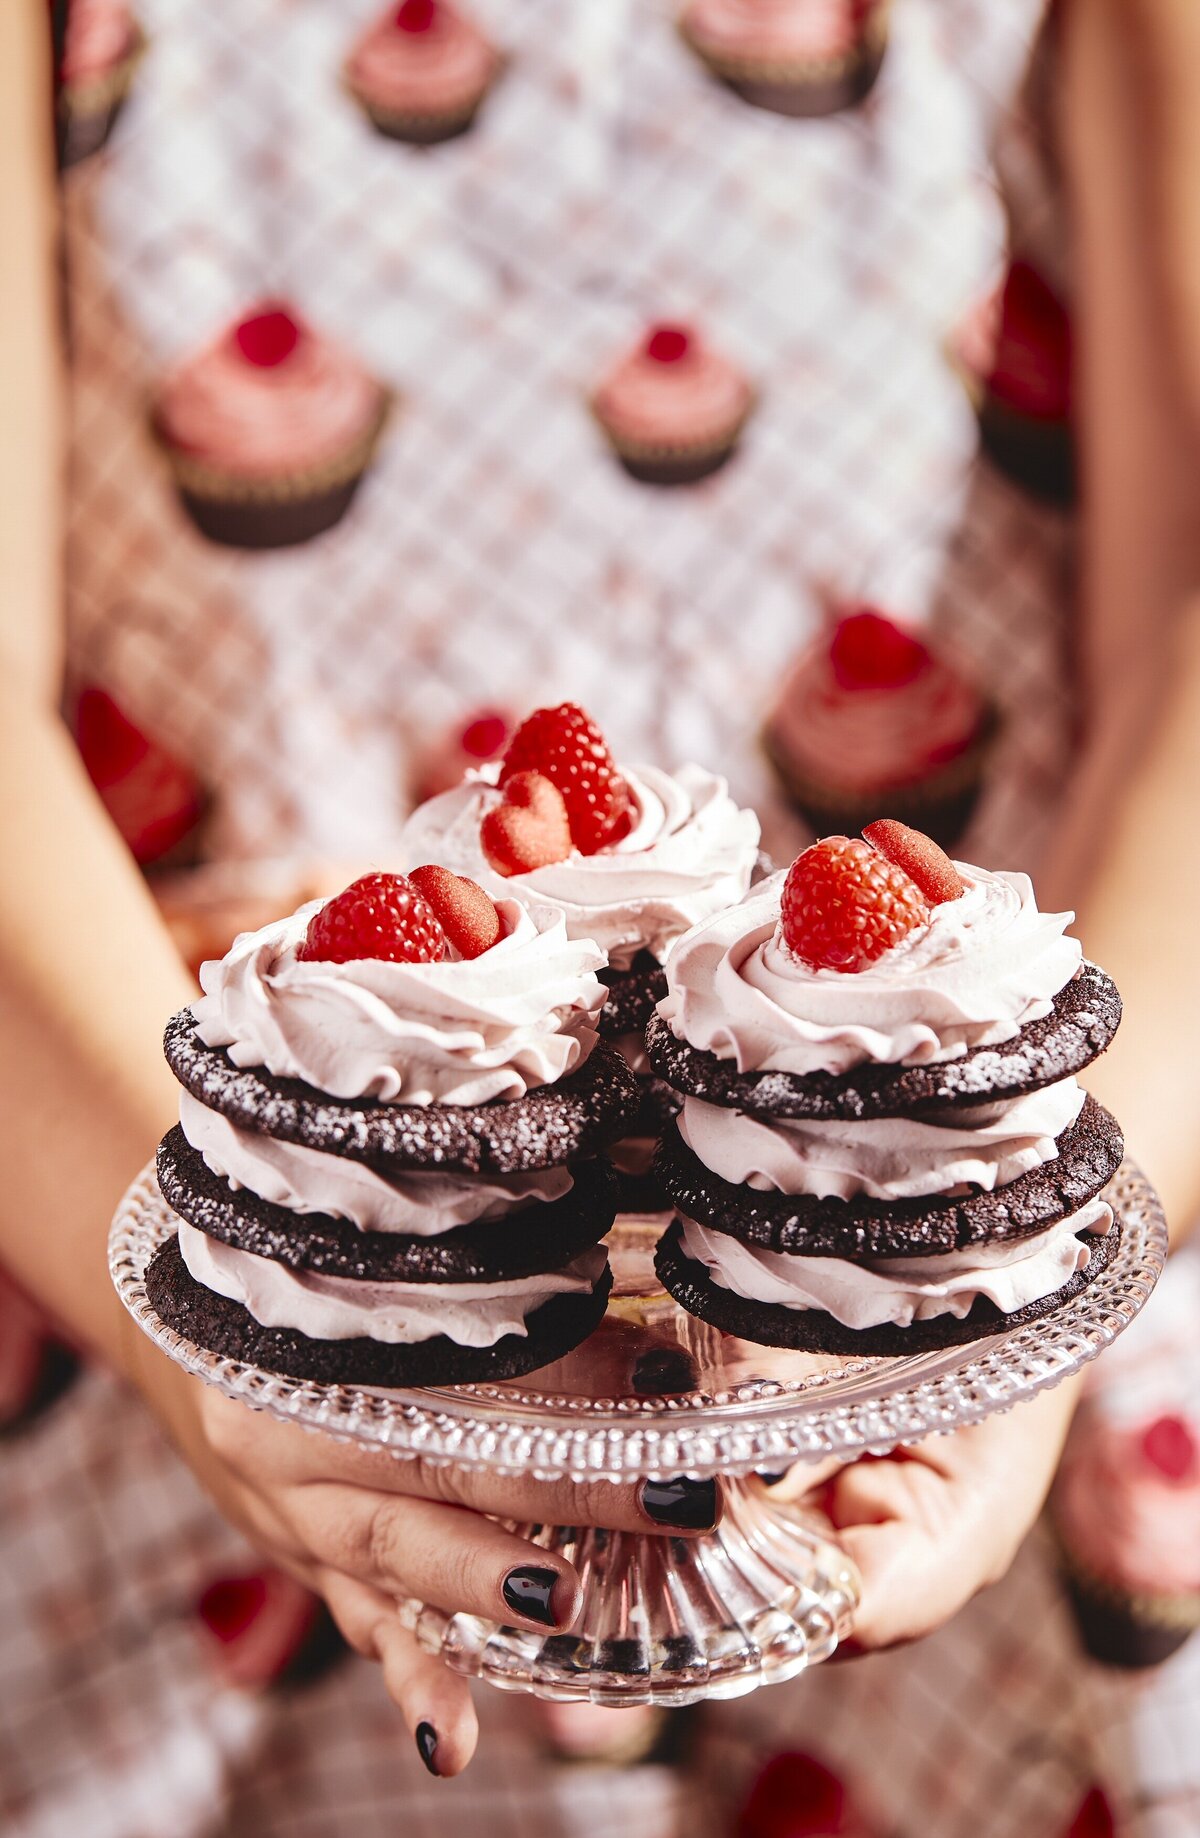 A double stacked ice cream sandwich with whipped cream and berries on top.